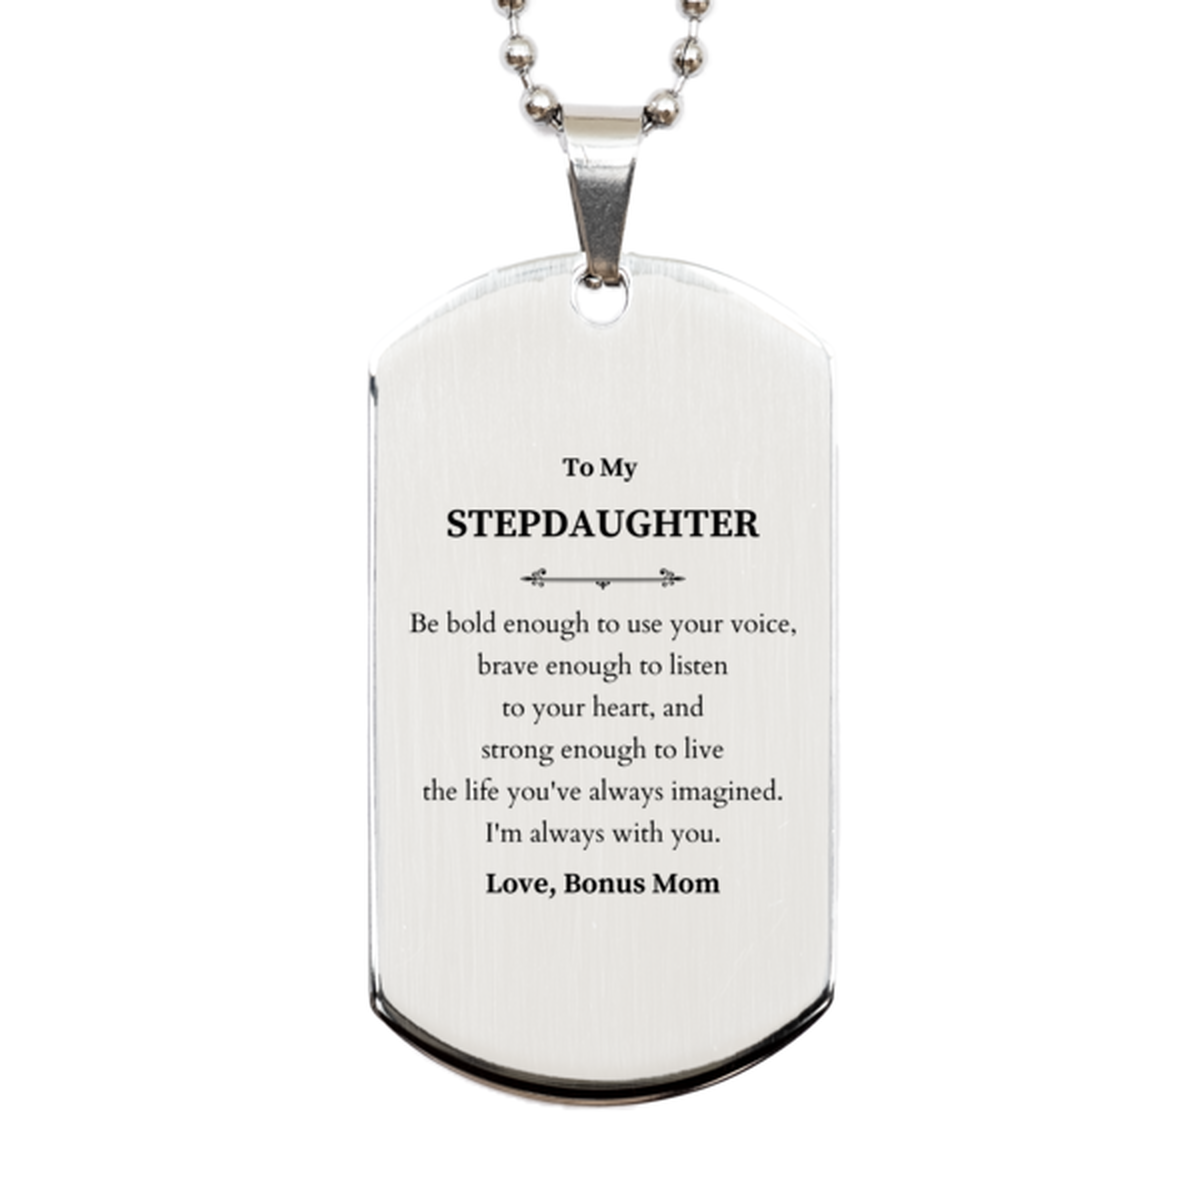 Keepsake Stepdaughter Silver Dog Tag Gift Idea Graduation Christmas Birthday Stepdaughter from Bonus Mom, Stepdaughter Be bold enough to use your voice, brave enough to listen to your heart. Love, Bonus Mom